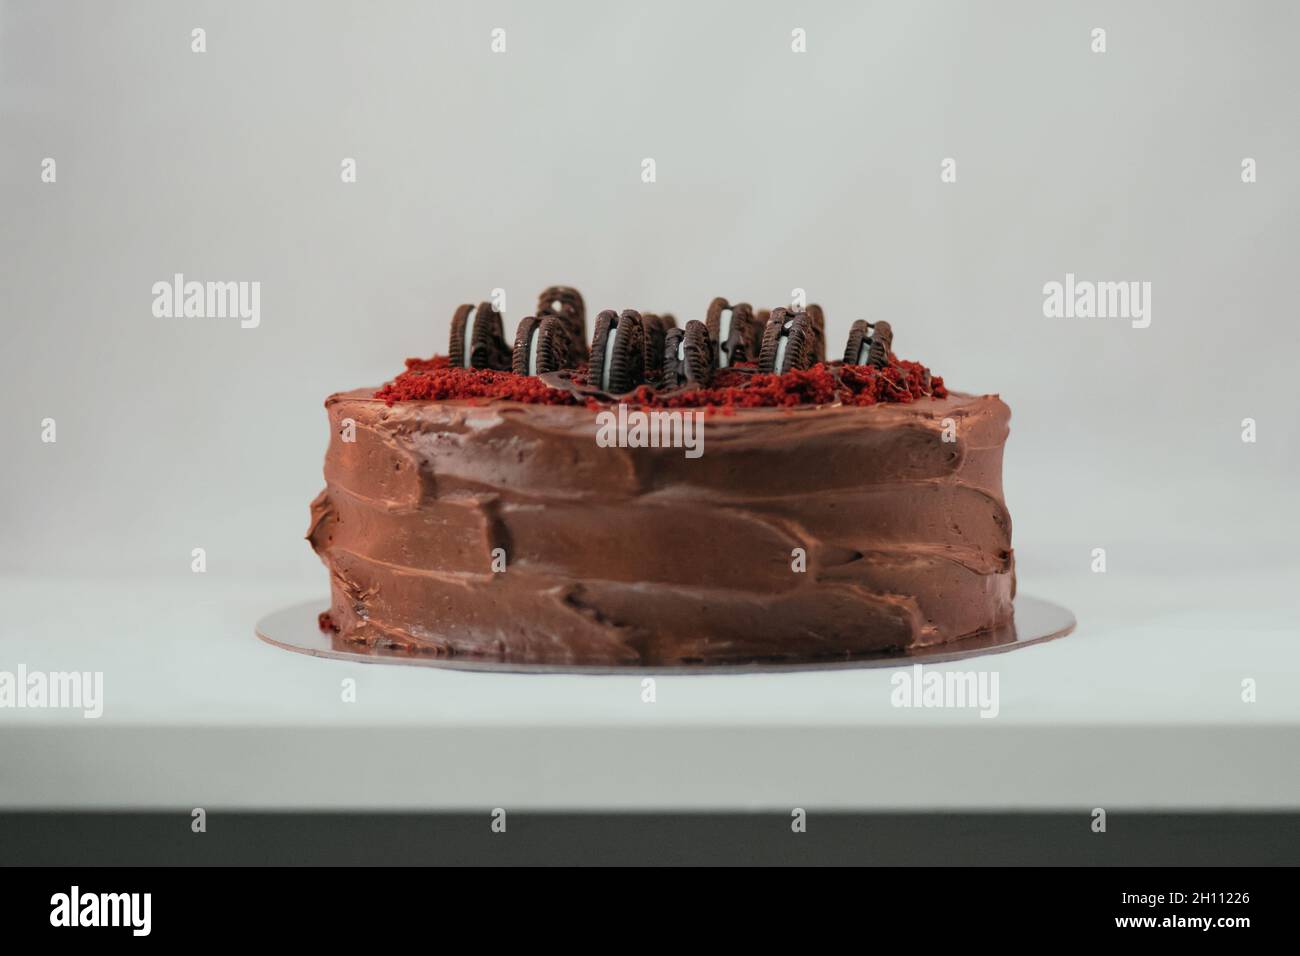 Delicious rich dark cake with Oreo on top on white background. Beautiful  tasty sweet dessert with multiple layers decorated with cookies Stock Photo  - Alamy